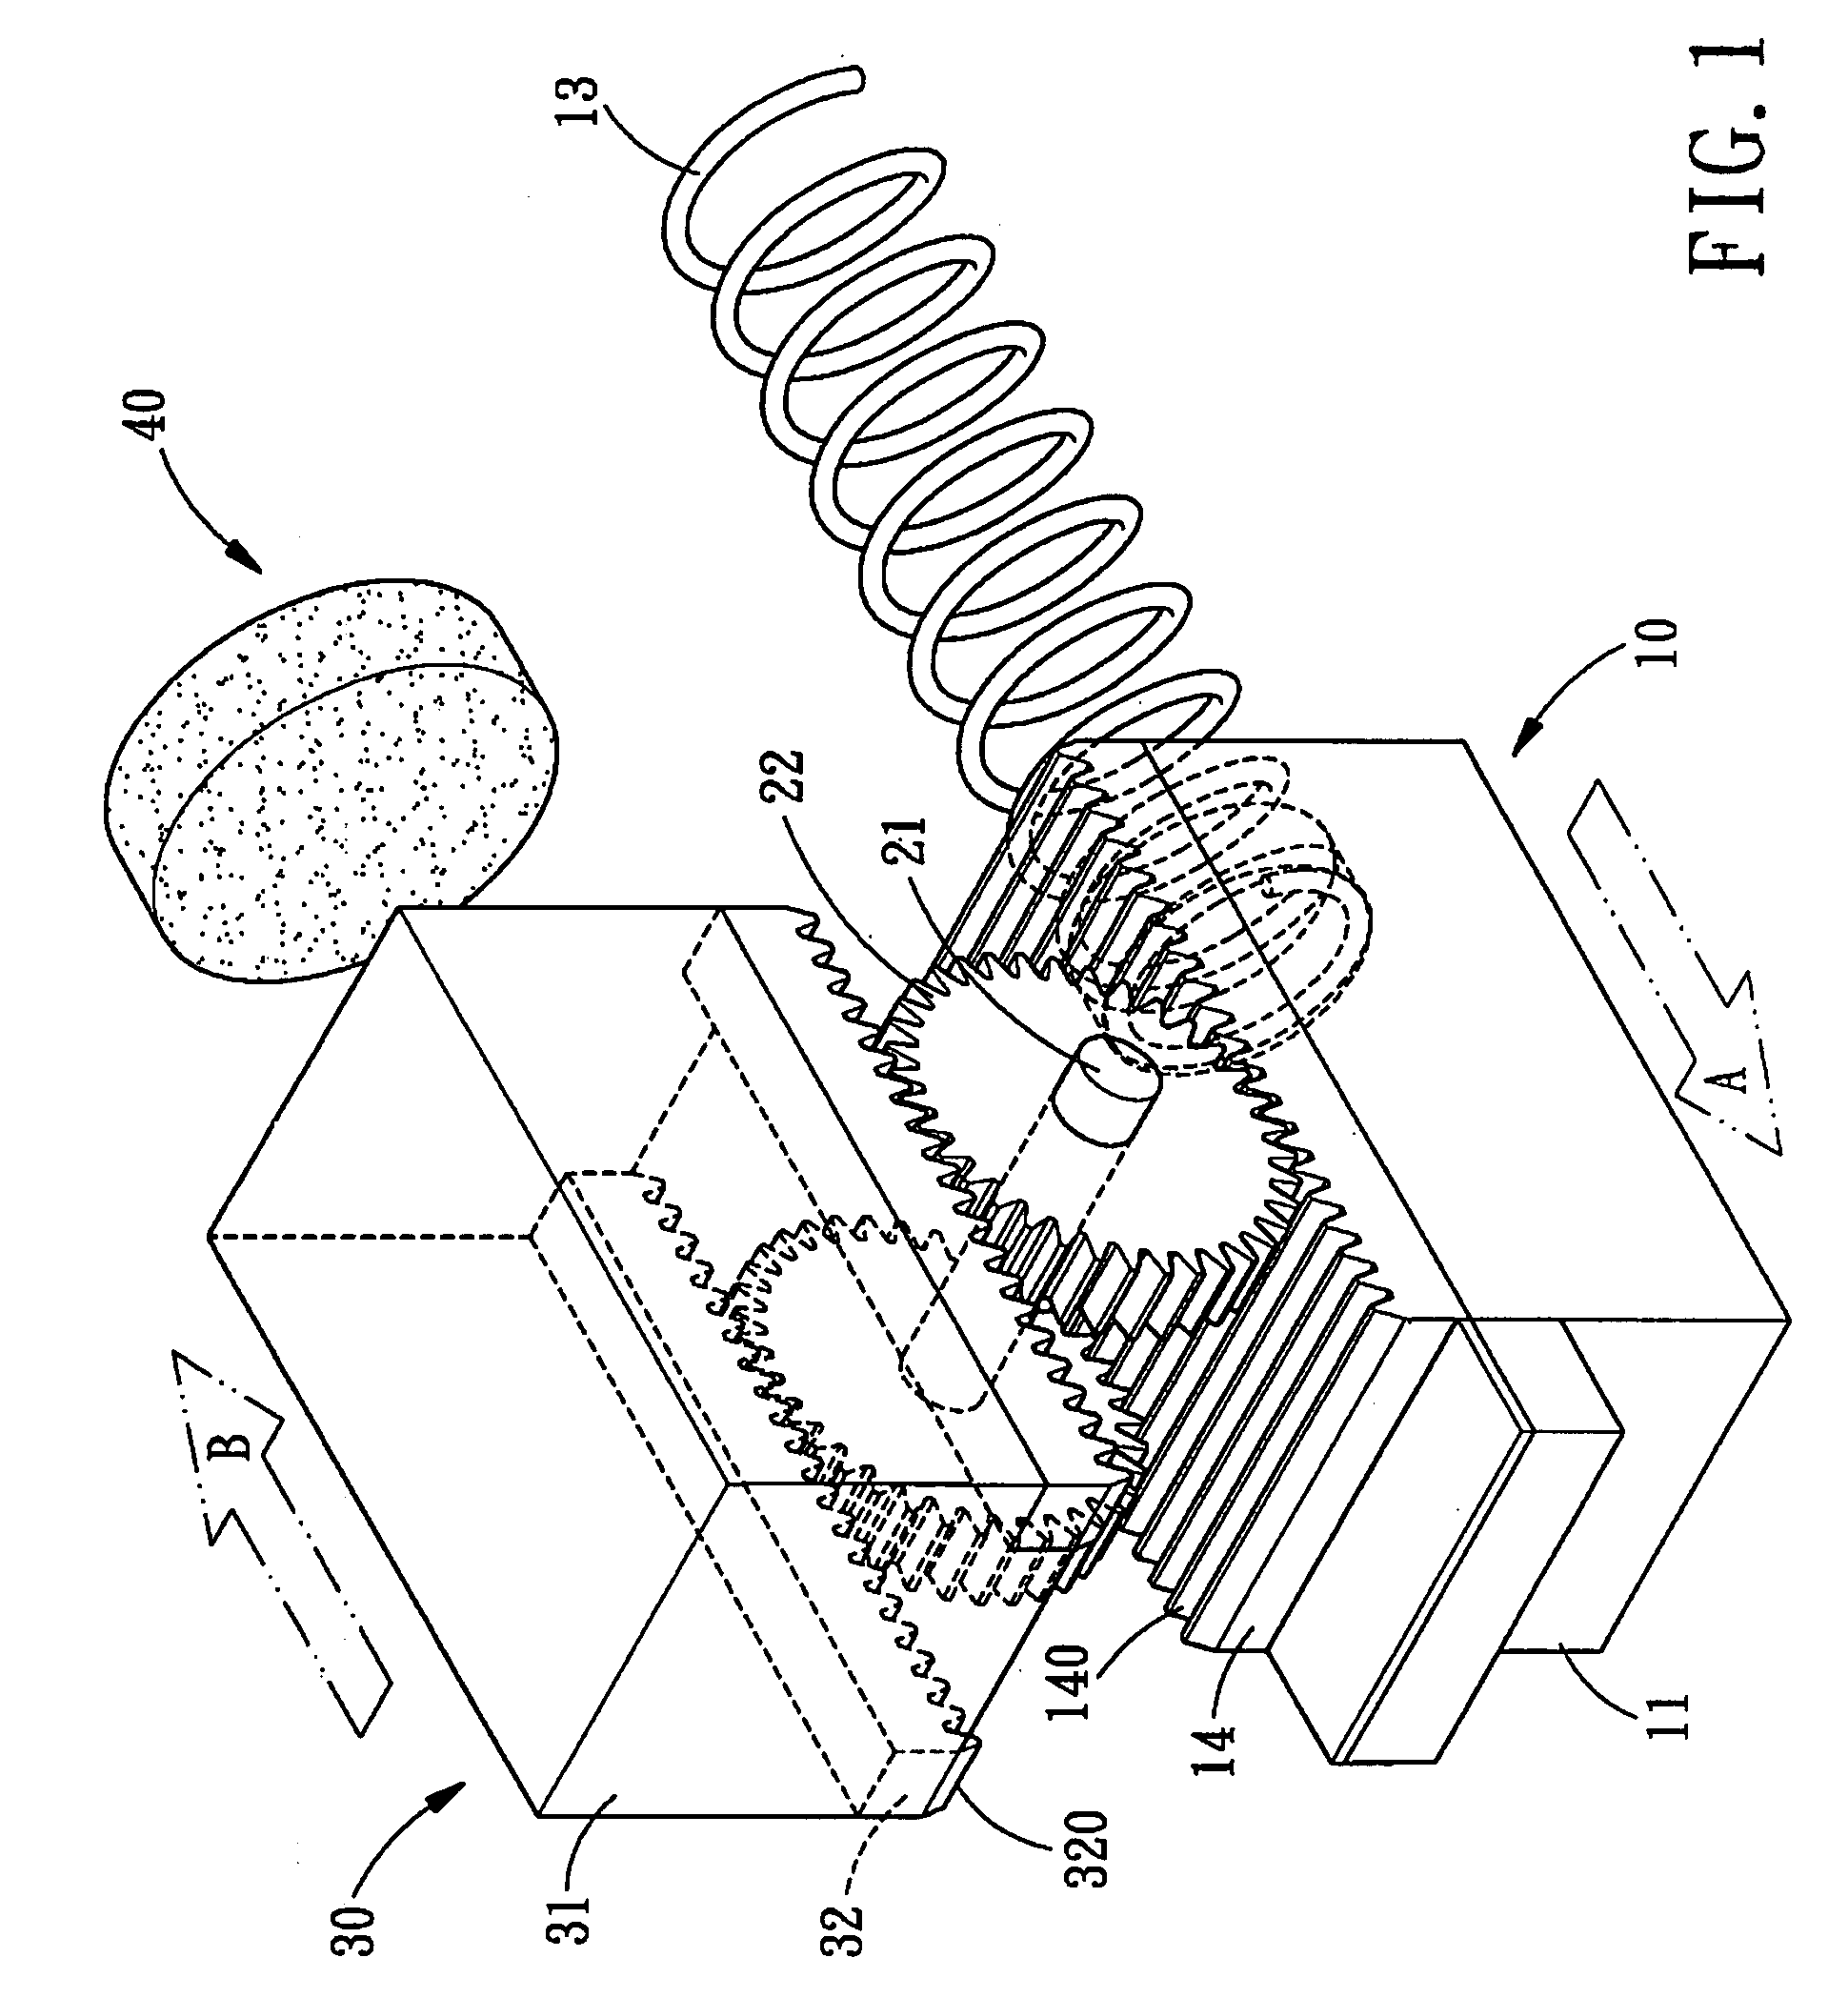 Counterforce-counteracting device for a nailer